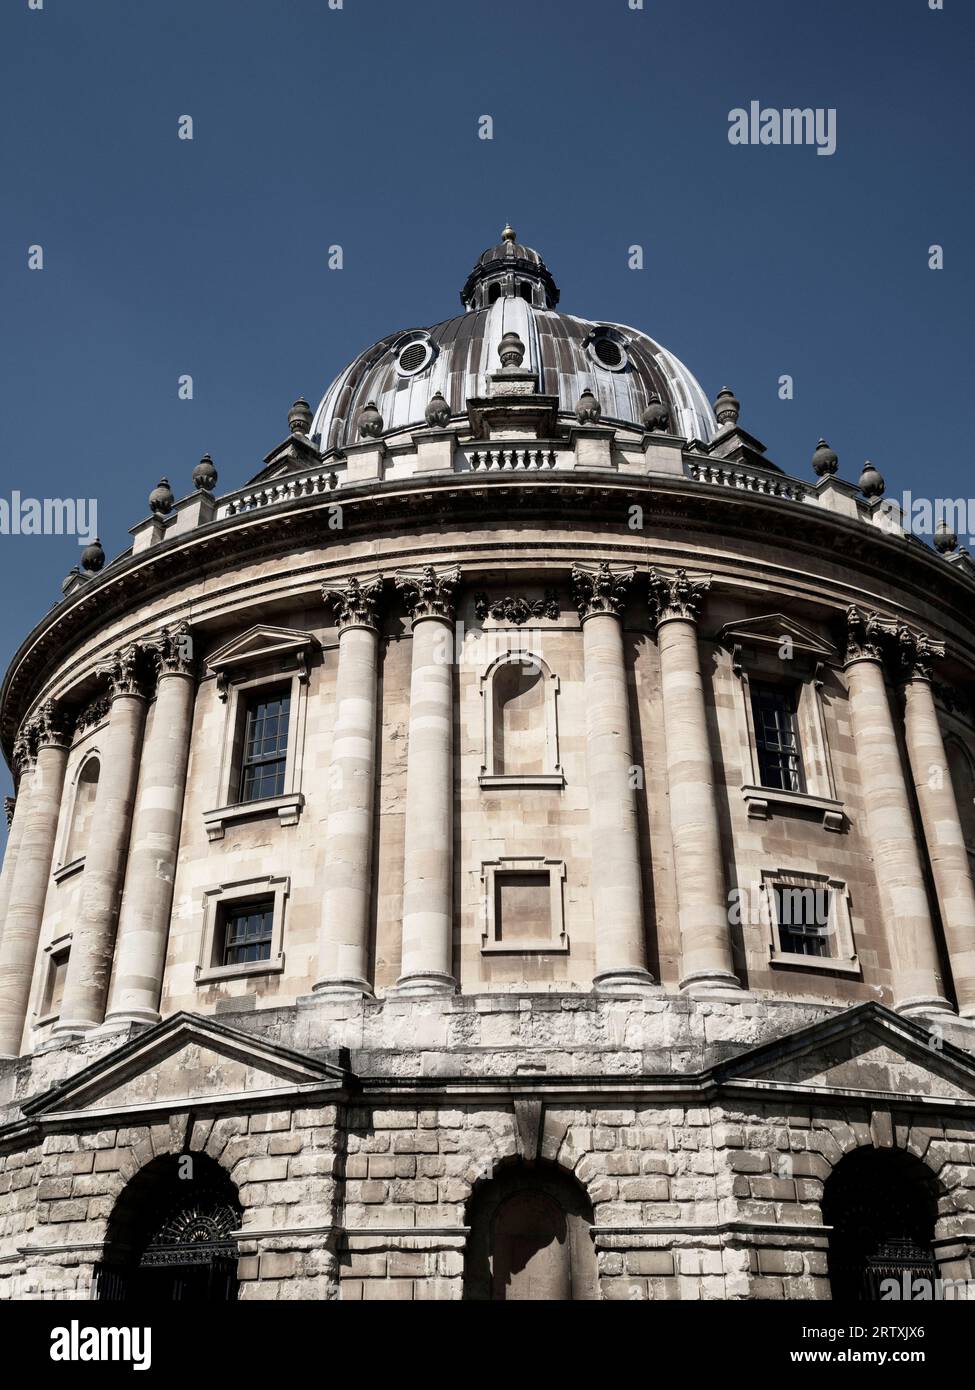 Radcliffe Camera, Famous Oxford Landmark, a Reading Library of the University of Oxford, Oxford, Oxfordshire, England, UK, GB. Stock Photo